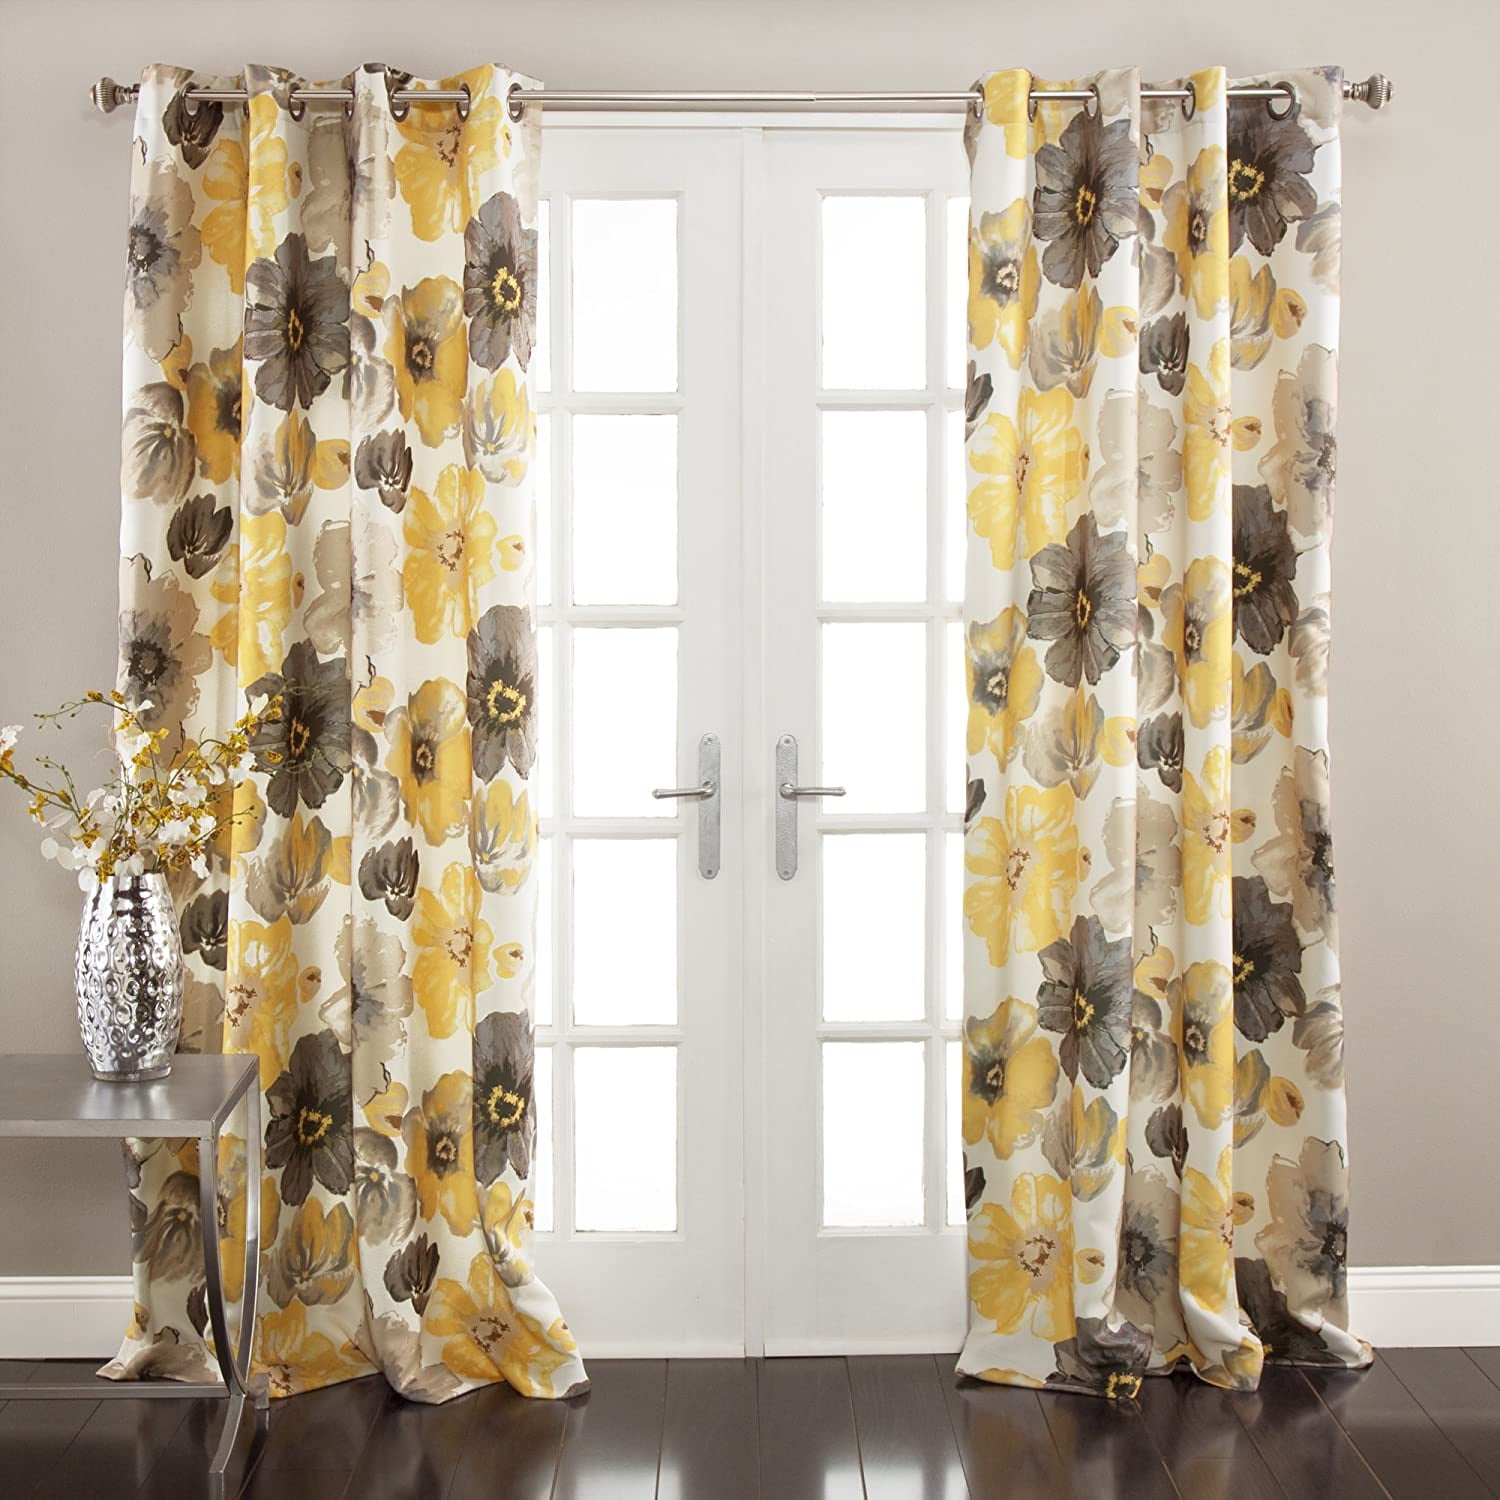 Details about   Butterfly Window Curtains 2 Panels Art Decorative Curtain Drapes with Grommets 